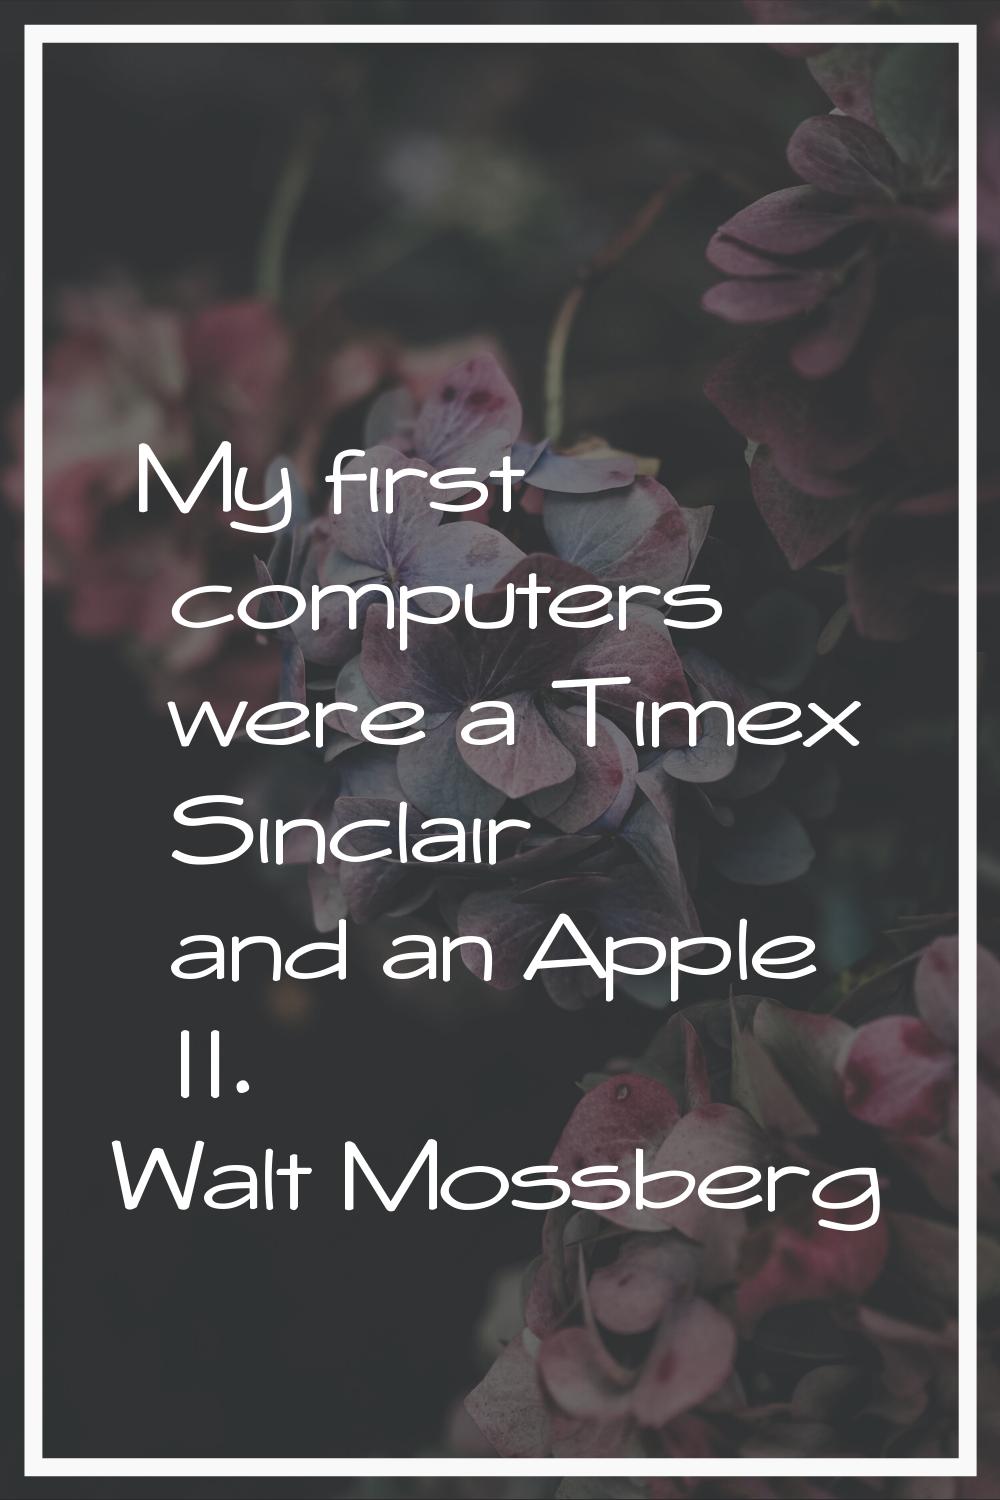 My first computers were a Timex Sinclair and an Apple II.